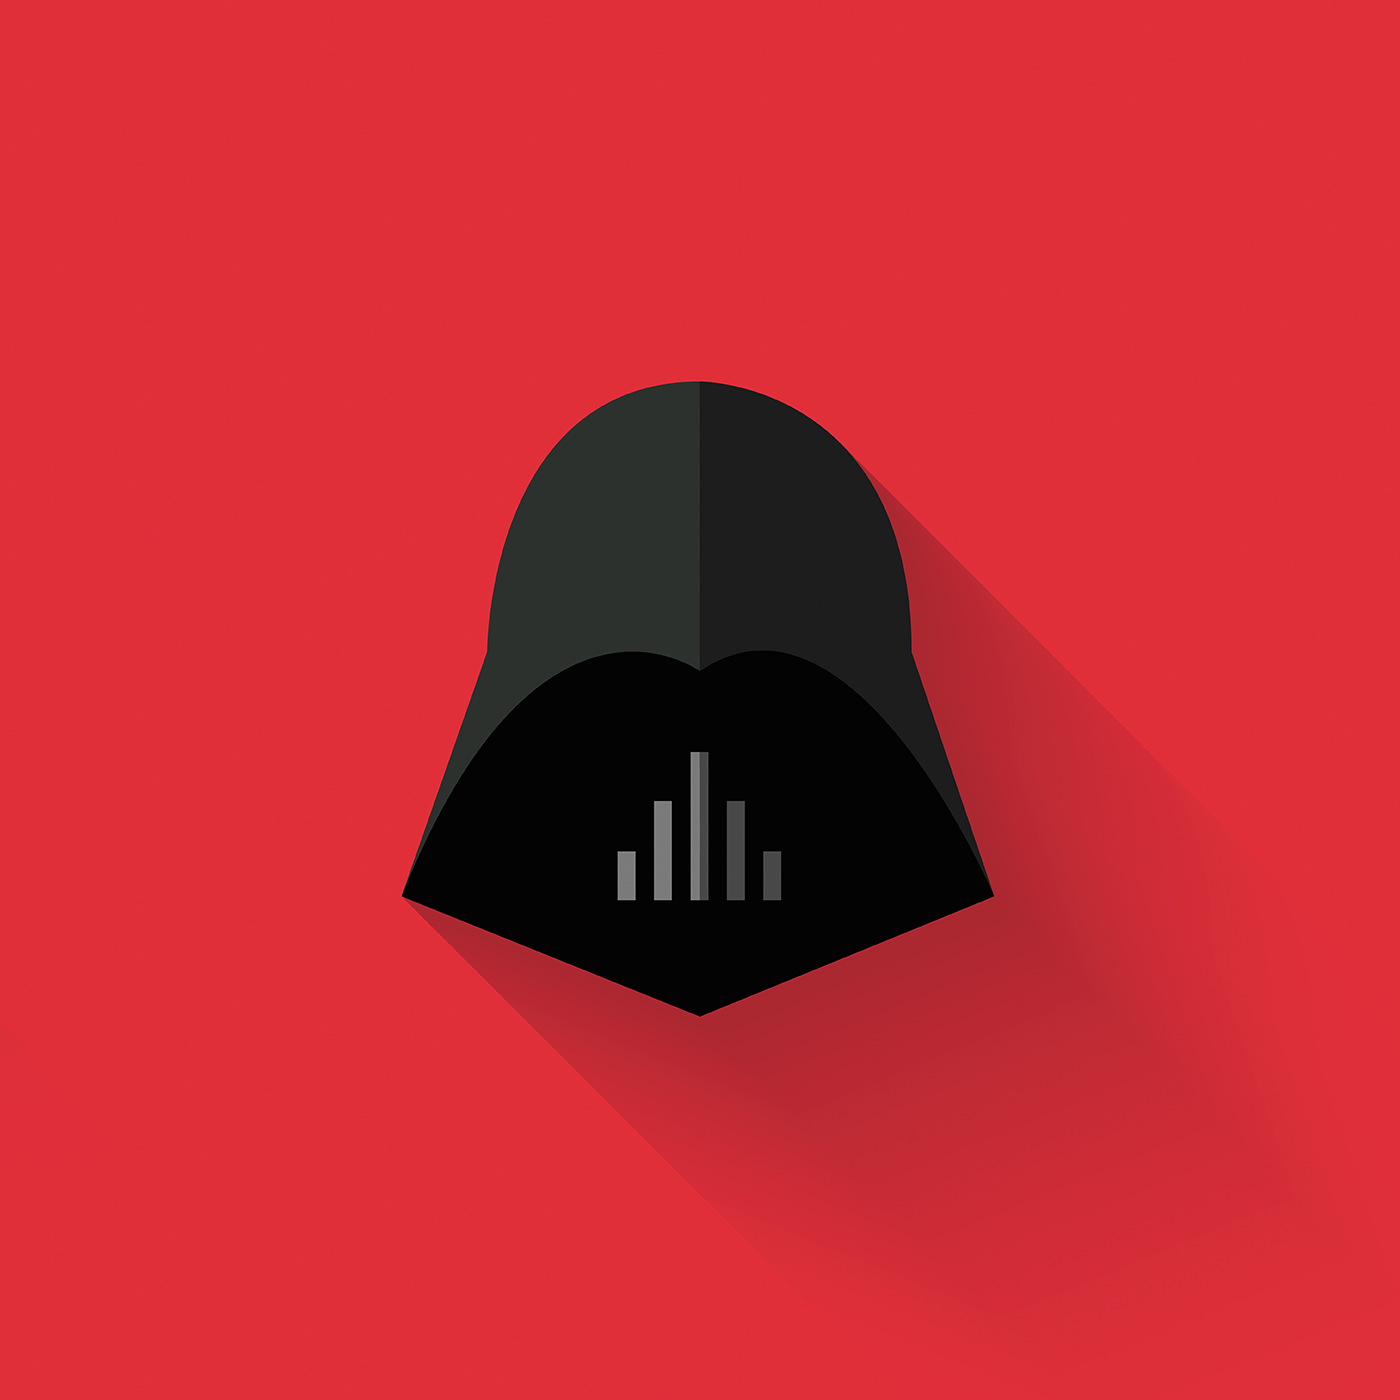 Adobe Portfolio Starwars flat design Long shadow design icons darth vader may the force Be with you flat icons creativeflip face icons characters iconic